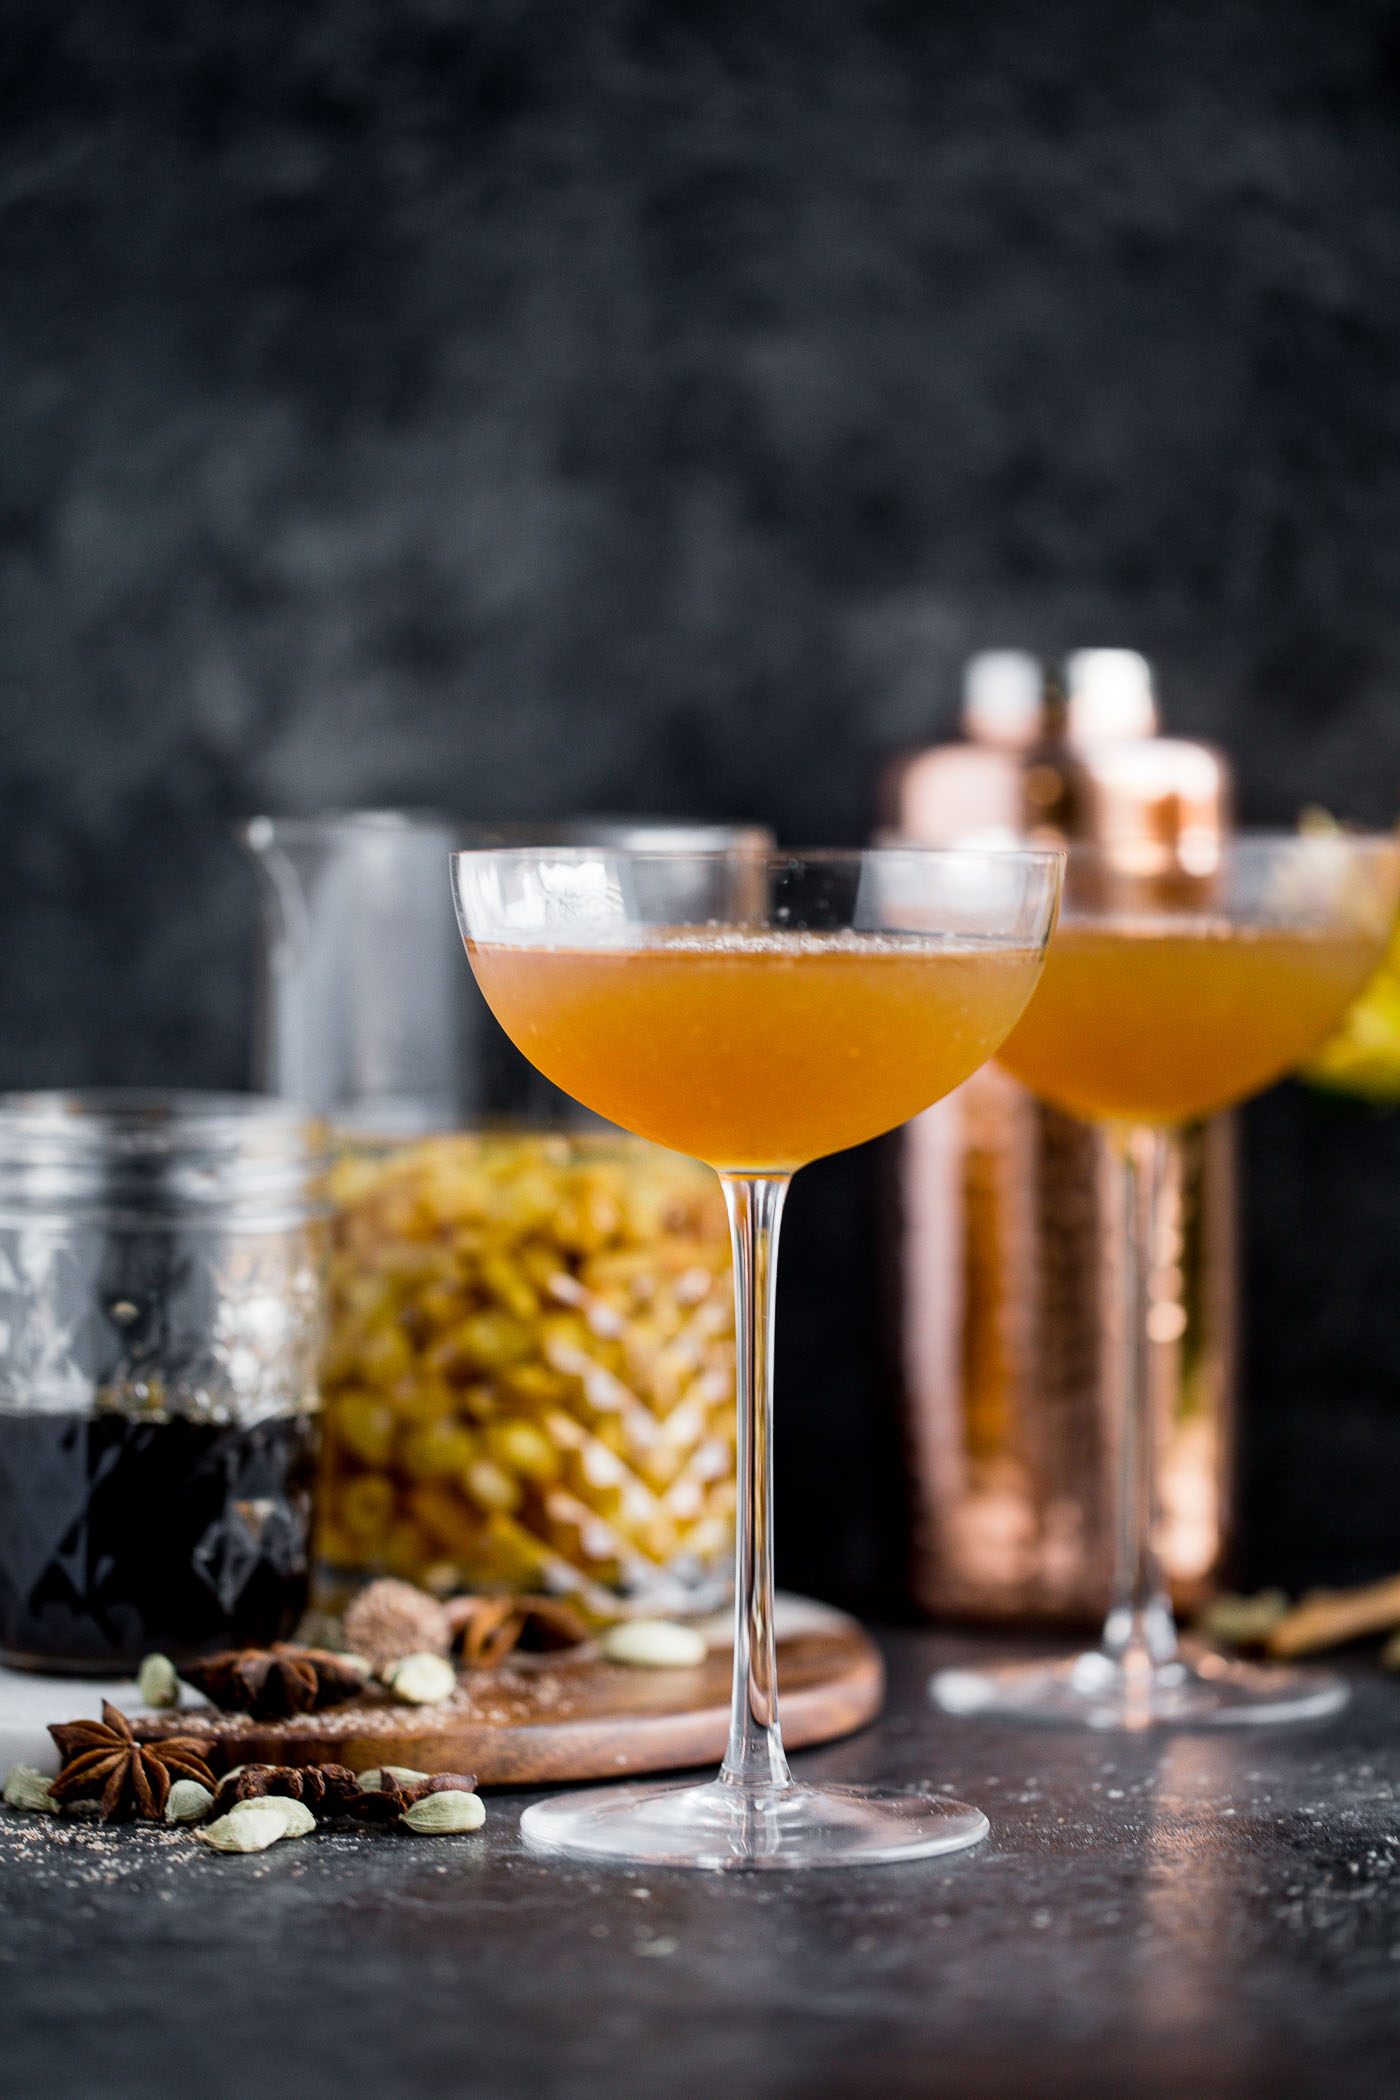 a cozy chai cocktail with golden raisin-infused spiced rum & homemade vanilla chai simple syrup. this chai cocktail is just as perfect for a cozy date night in as it is for celebrating with friends & loved ones this winter season. the perfect cozy winter nightcap. cheers! #playswellwithbutter #chai #rum #hygge #datenightathome #cocktail #cocktailrecipe #wintercocktail #winterdrink #cozycocktail #cozy